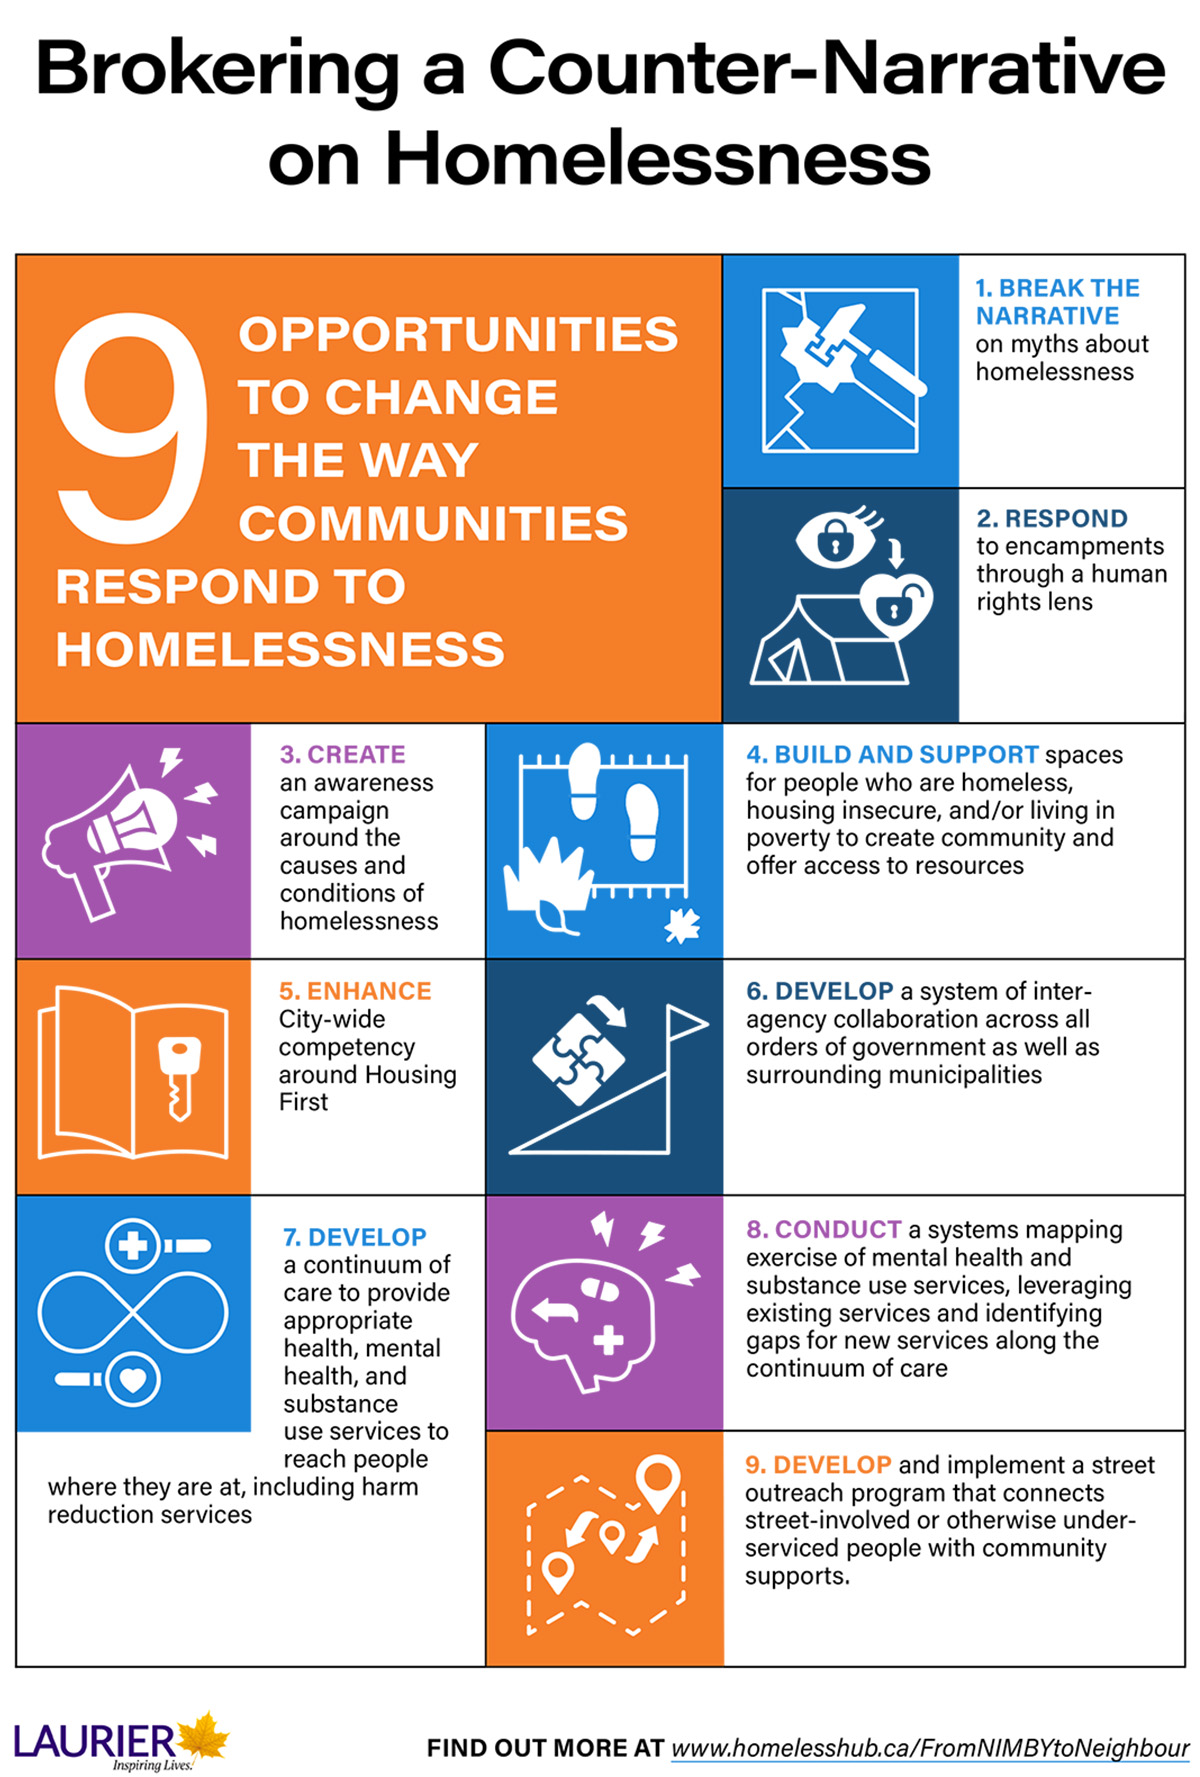 Infographic summarized the 9 opportunities for change.